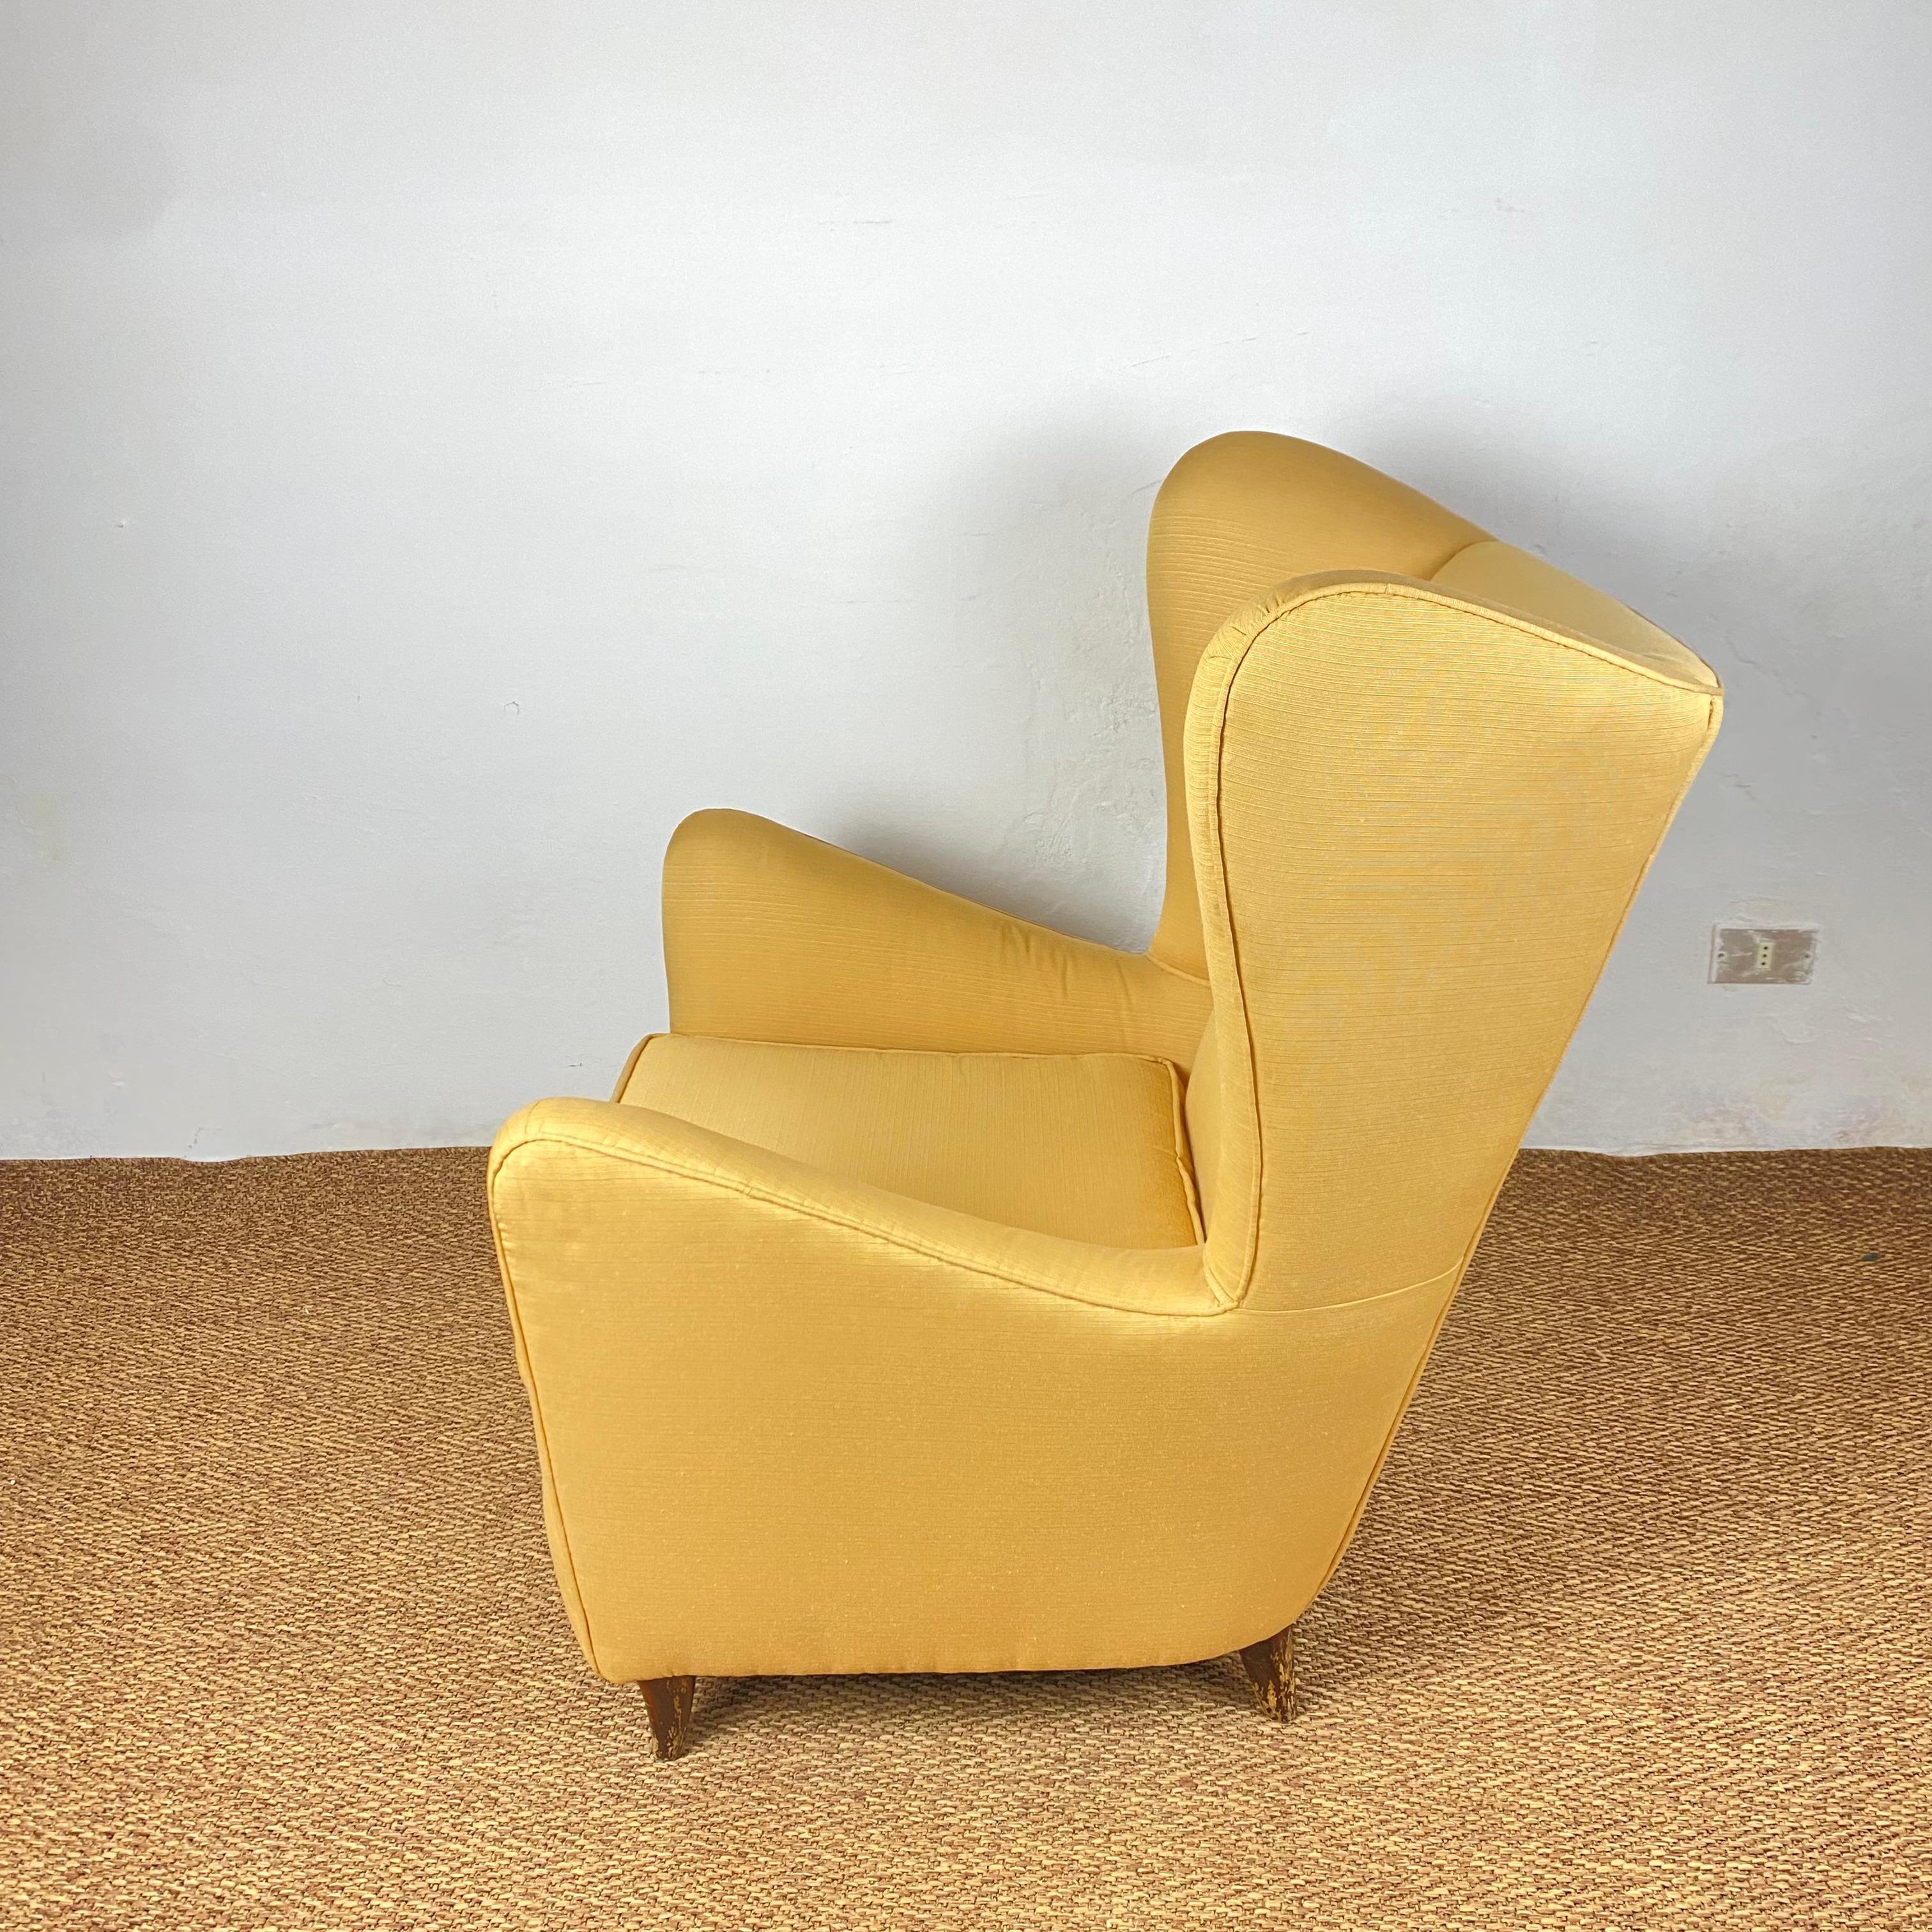 Superb pair of Gio Ponti style armchairs.
The armchairs are in perfect vintage condition, finely lined in yellow silk, the feet show some signs of aging but in perfect structural condition.
 
Dimensions: H96X80X90cm.